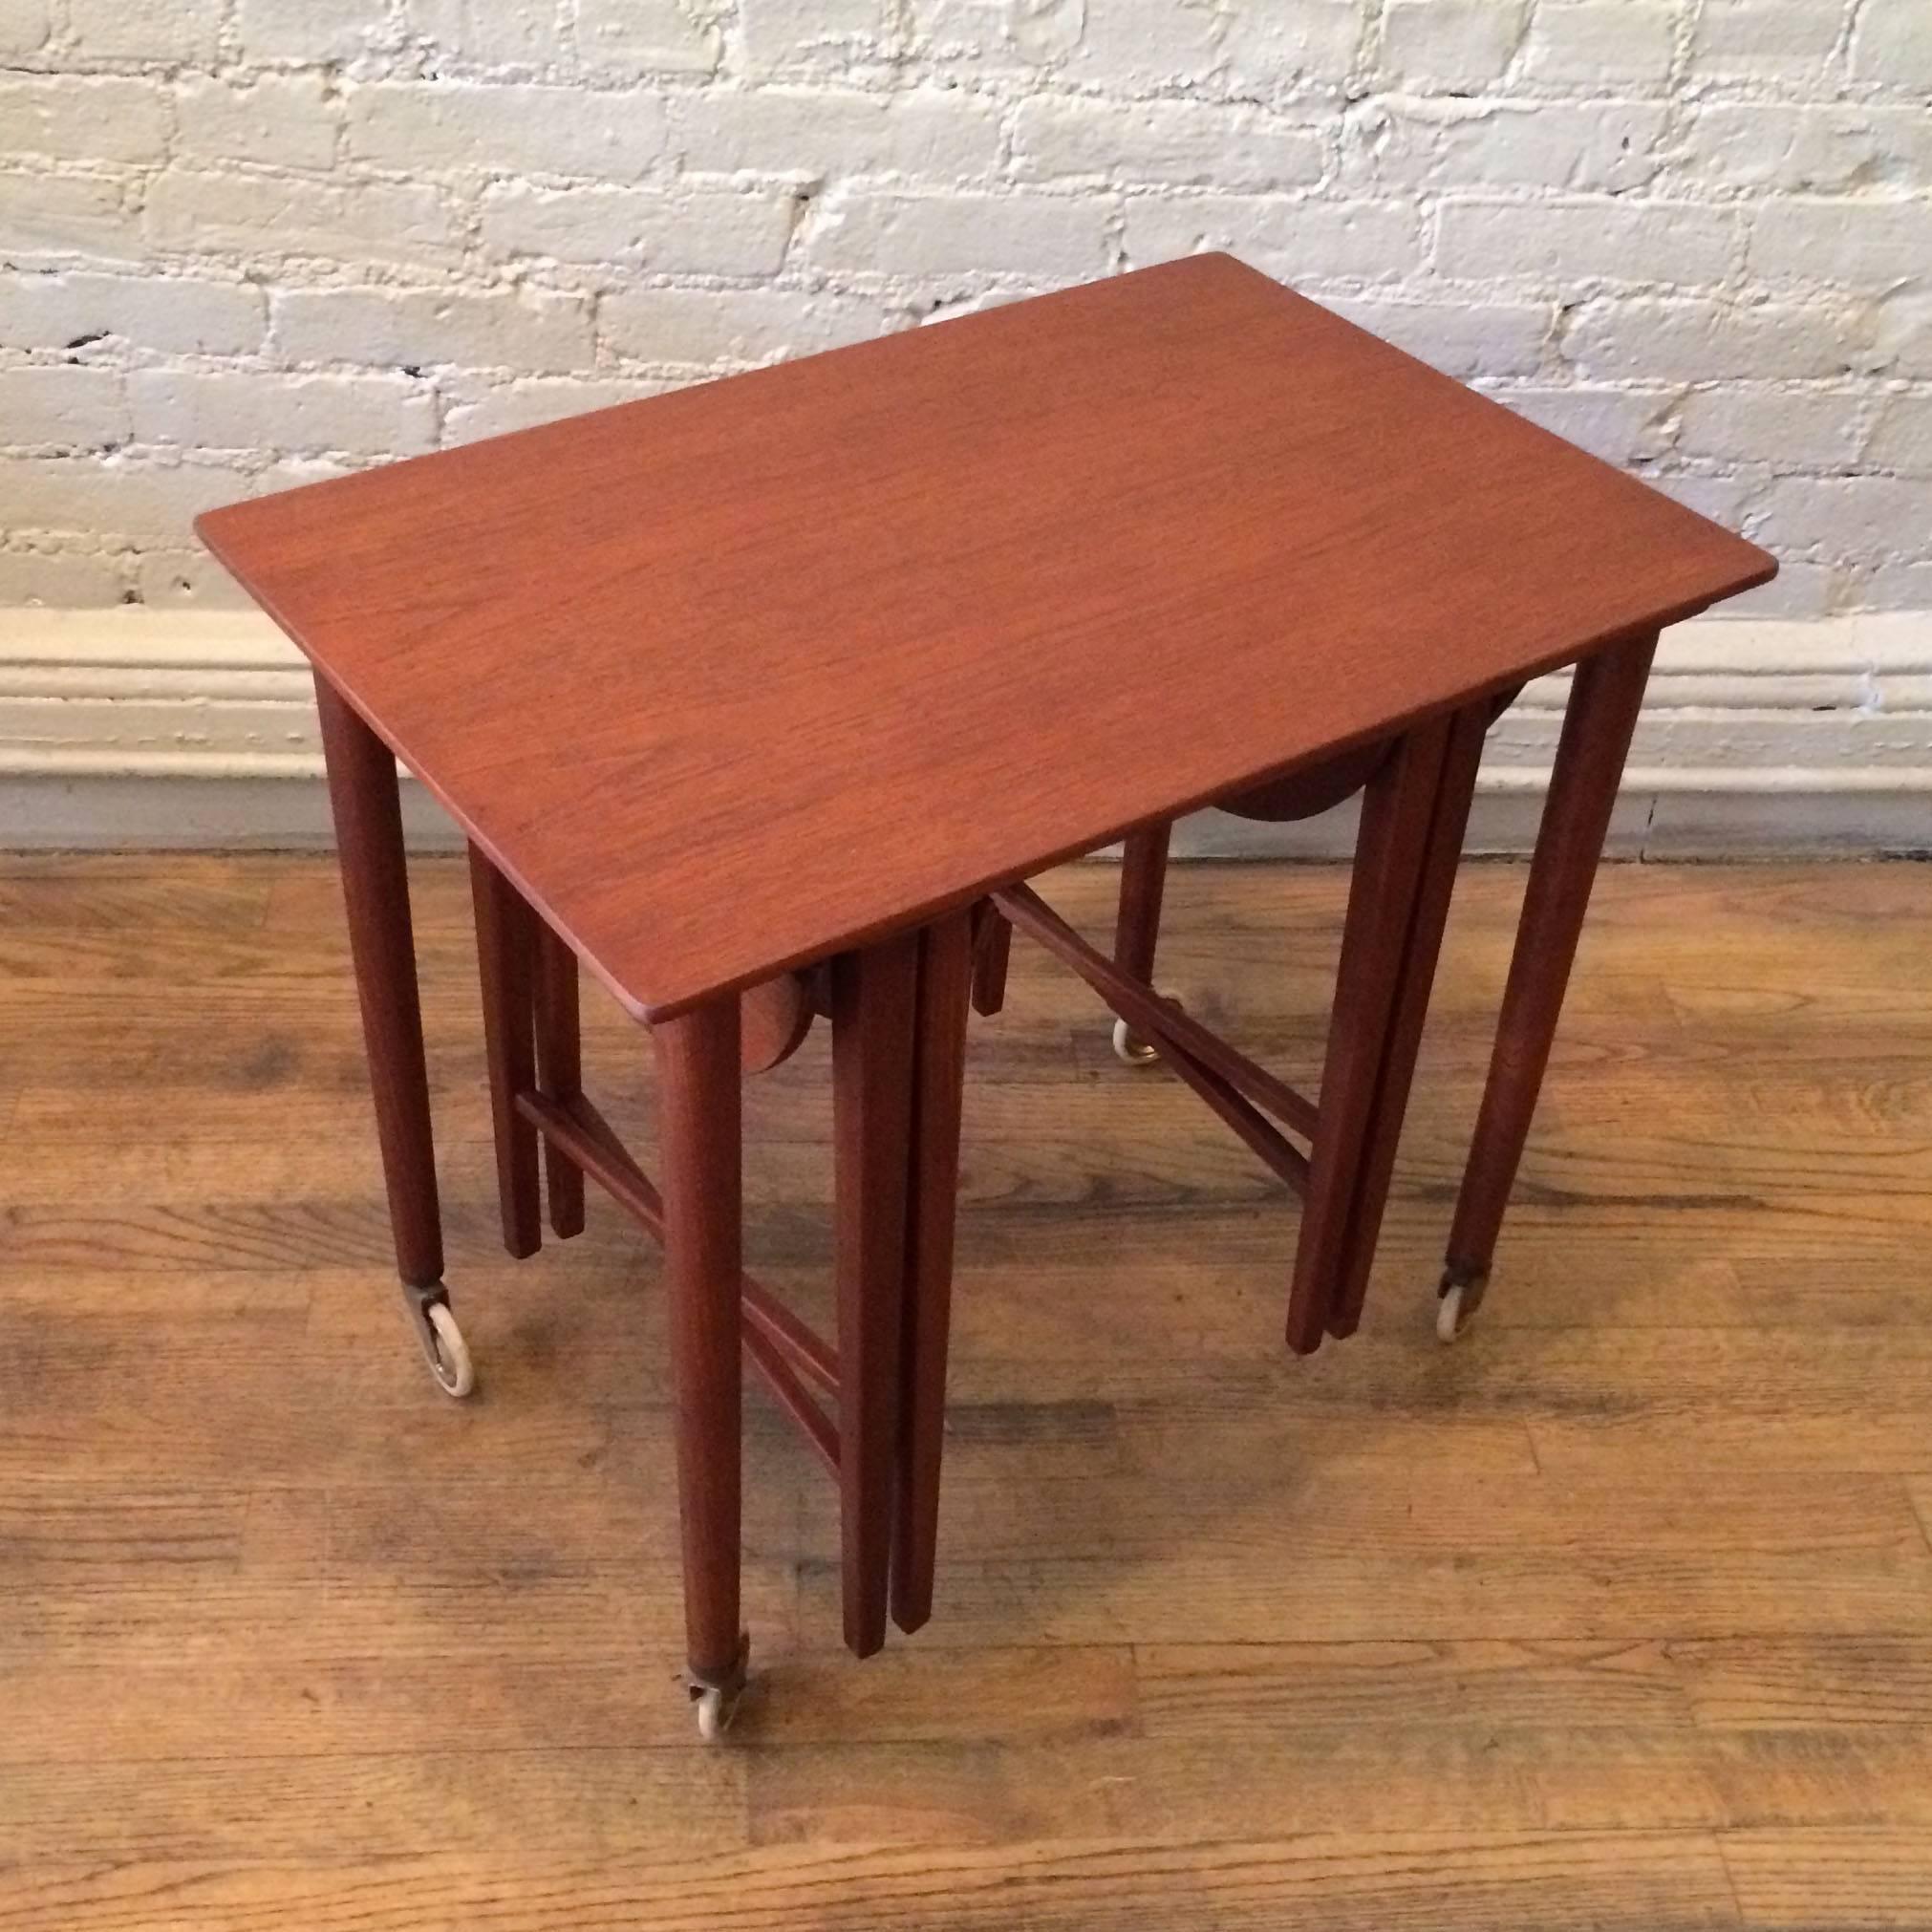 Set of three Danish modern, teak, nesting tables attributed to Grete Jalk has one rolling rectangular table with two folding round top tables that suspend stored under carriage.

Overall dimension is 24